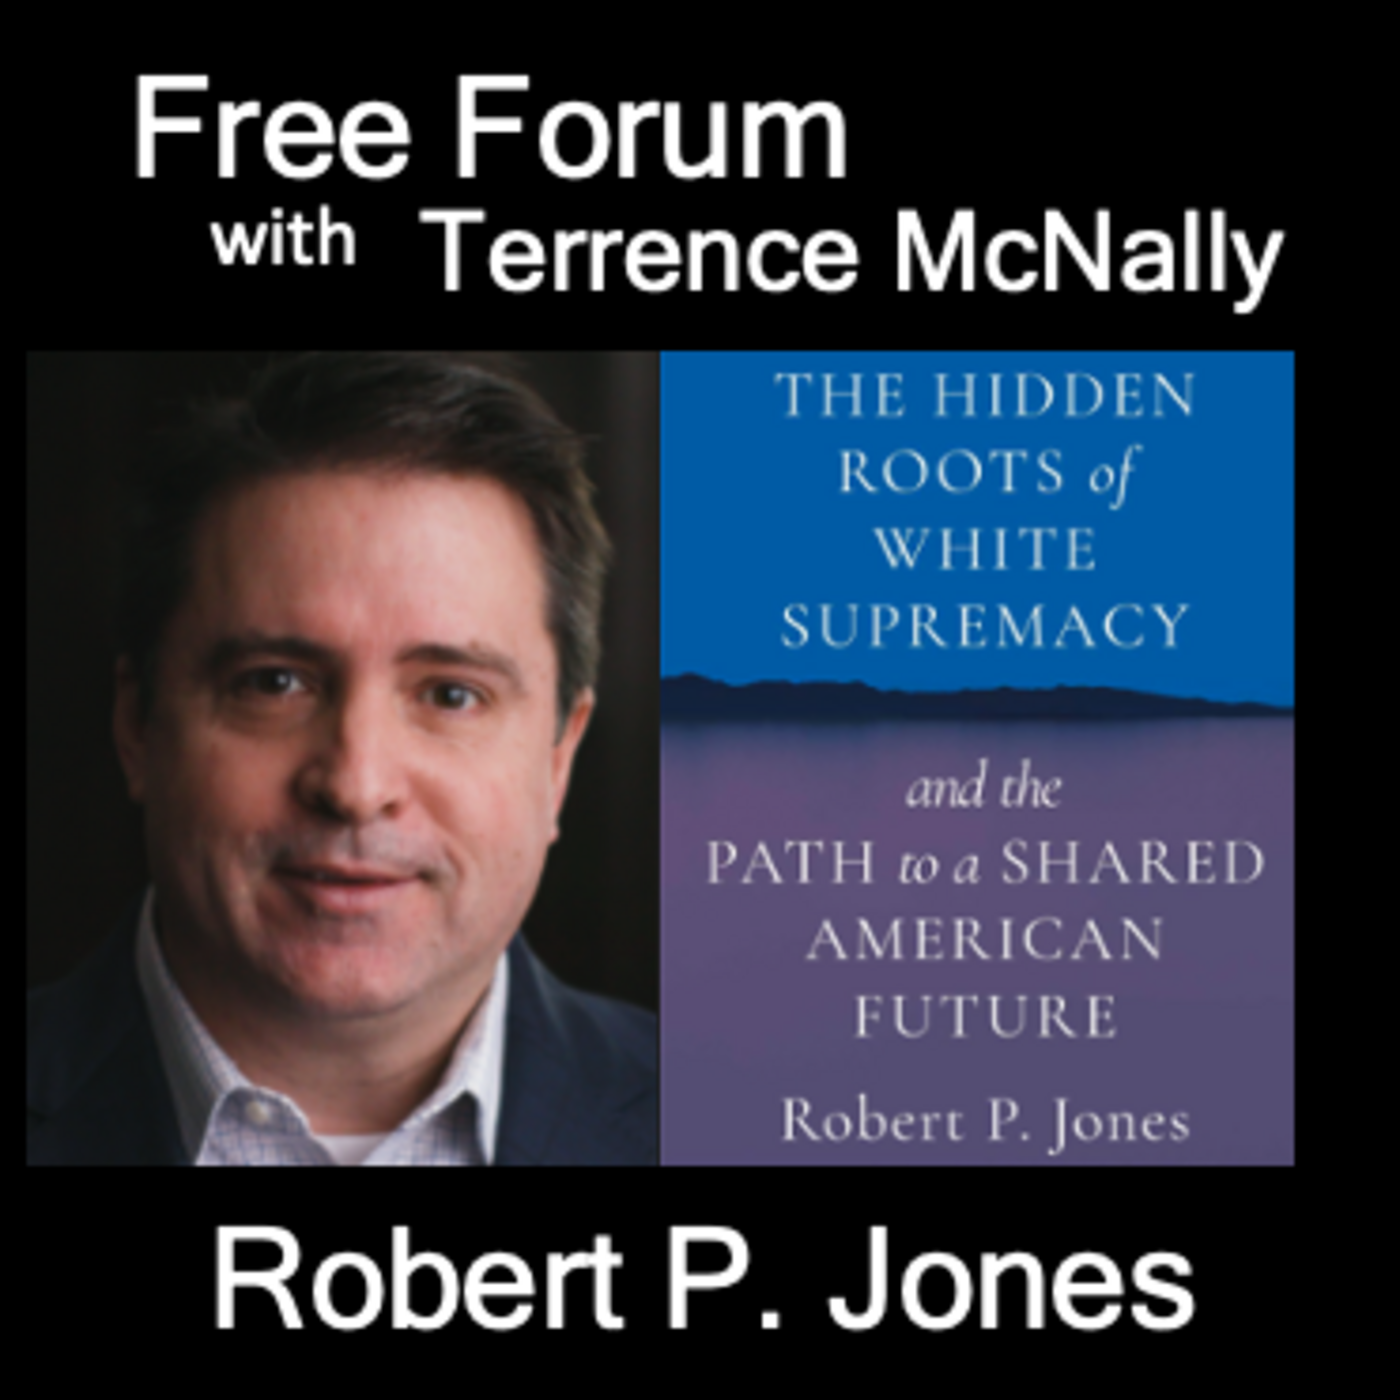 Episode 630: ROBERT P. JONES-THE HIDDEN ROOTS OF WHITE SUPREMACY and the Path to a Shared American Future